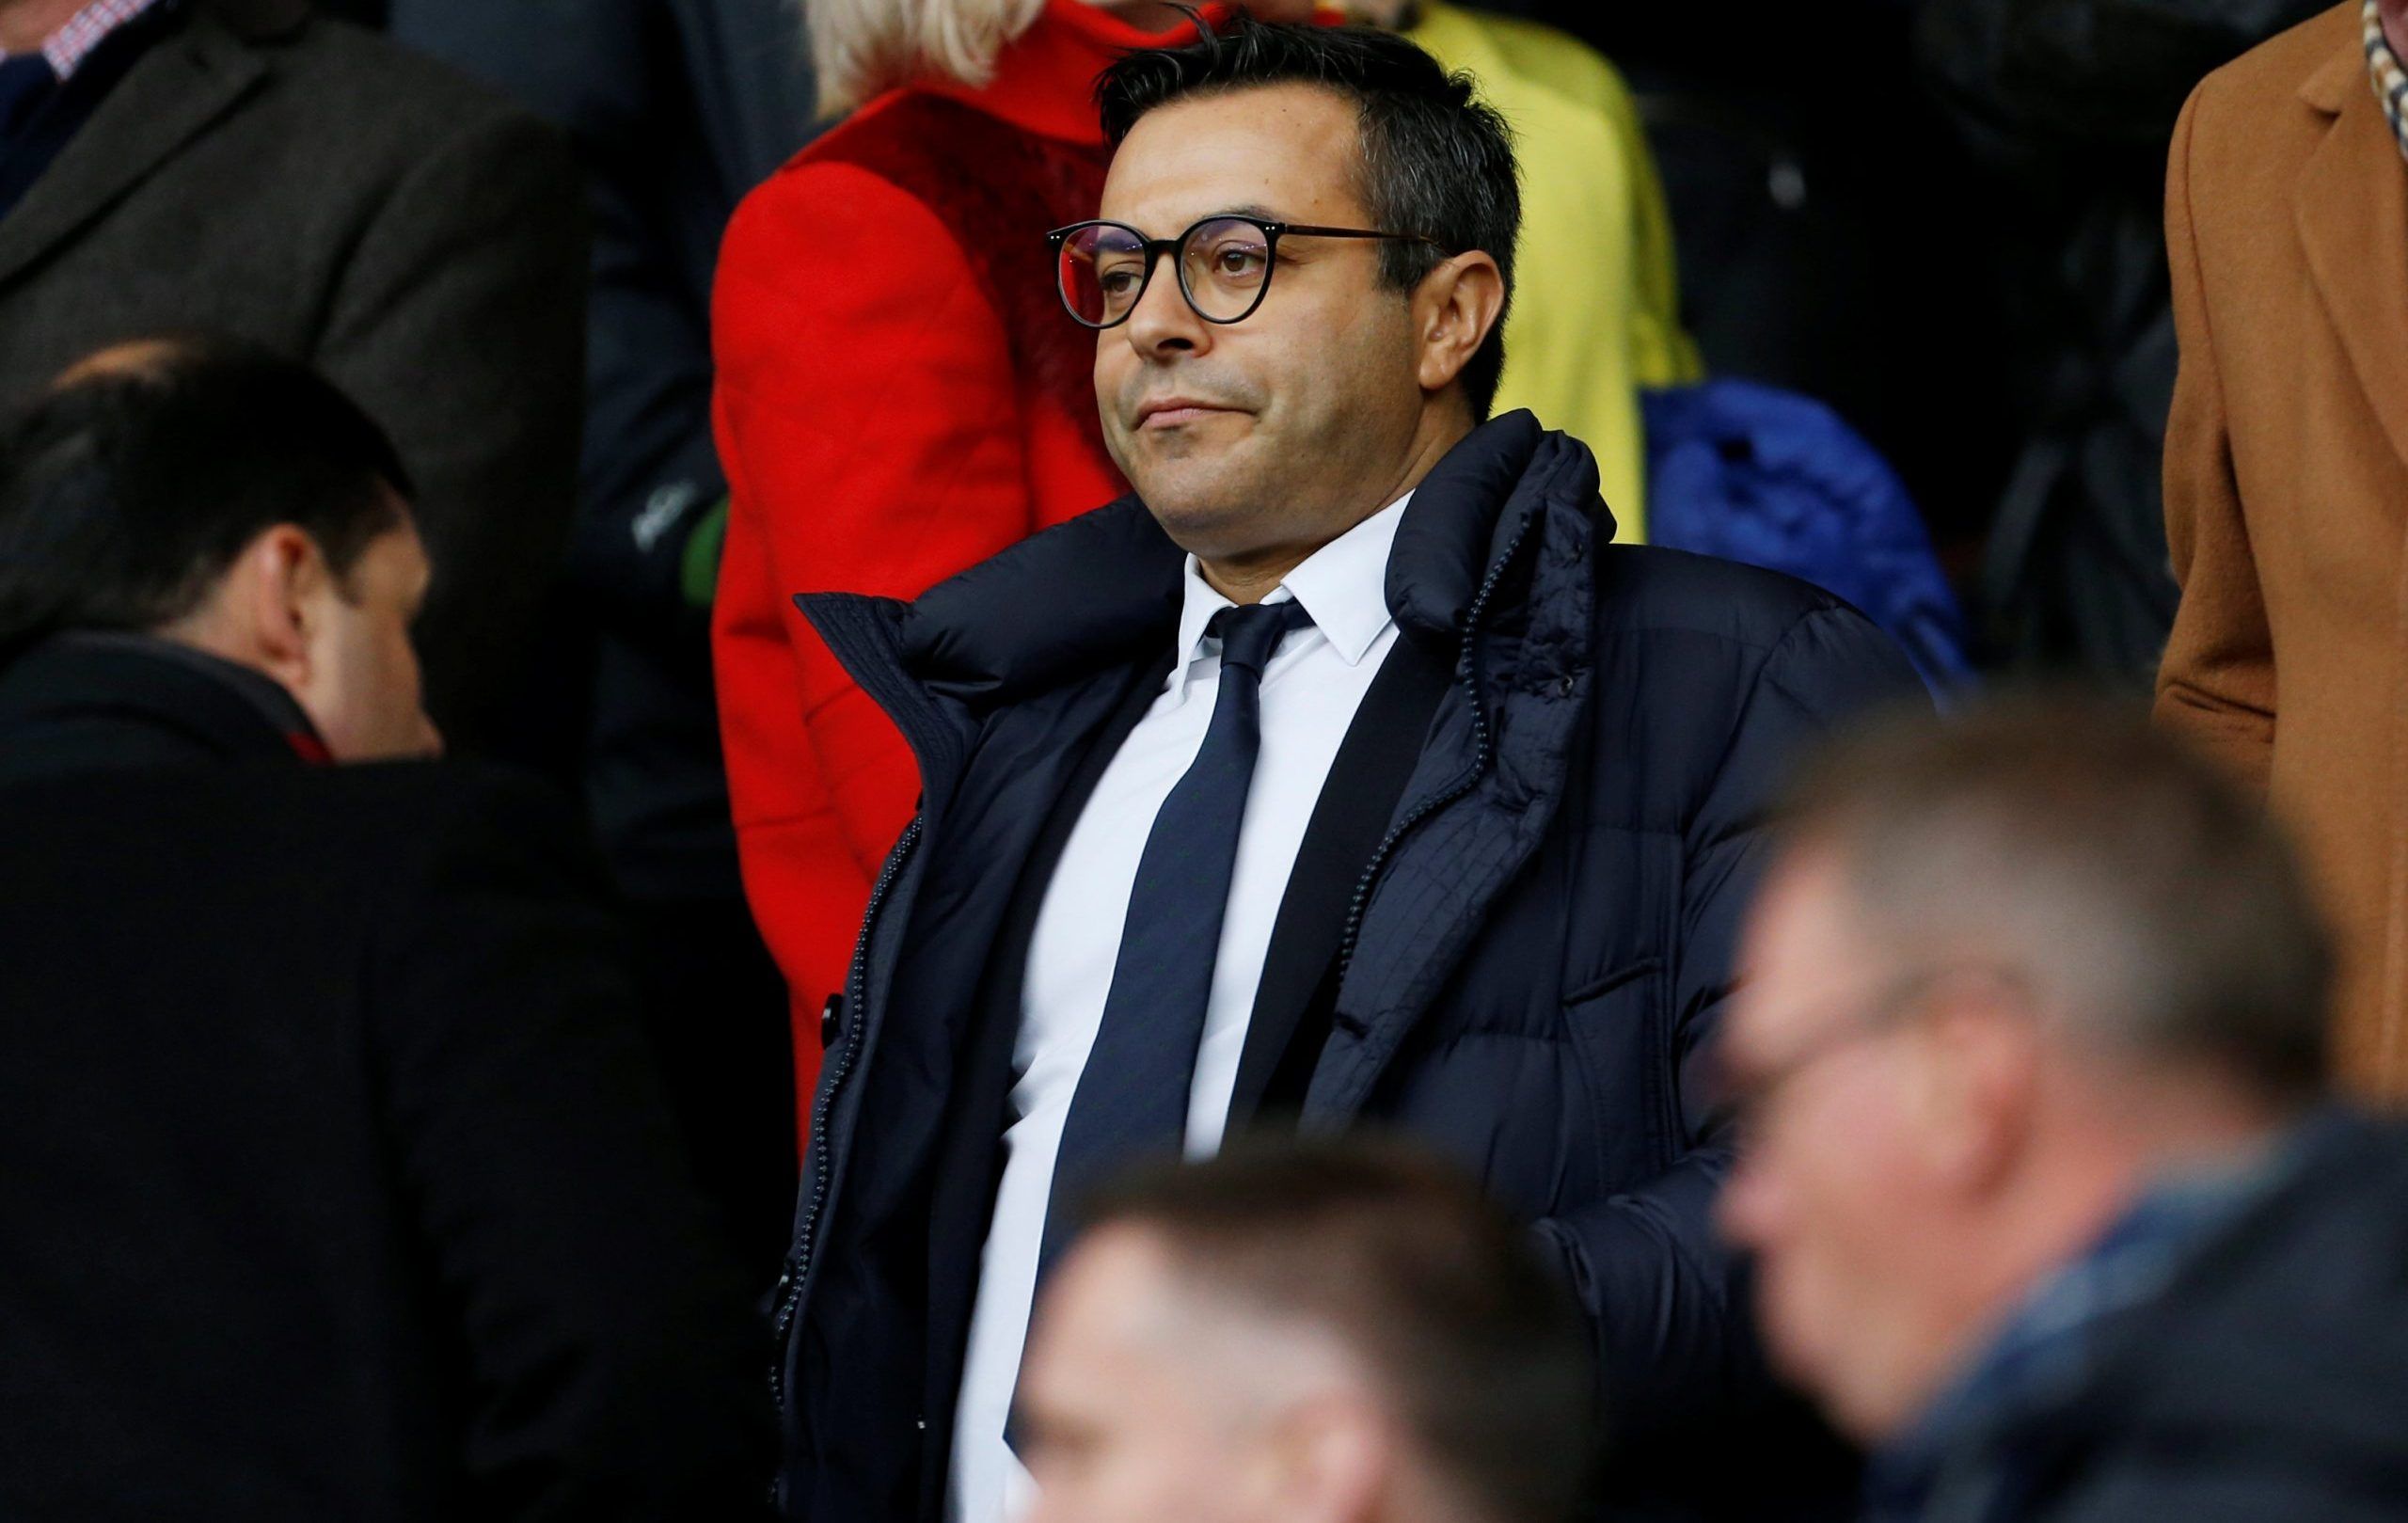 Soccer Football - Championship - Sheffield United v Leeds United - Bramall Lane, Sheffield, Britain - December 1, 2018   Leeds United chairman Andrea Radrizzani looks on from the stand   Action Images/Craig Brough    EDITORIAL USE ONLY. No use with unauthorized audio, video, data, fixture lists, club/league logos or 